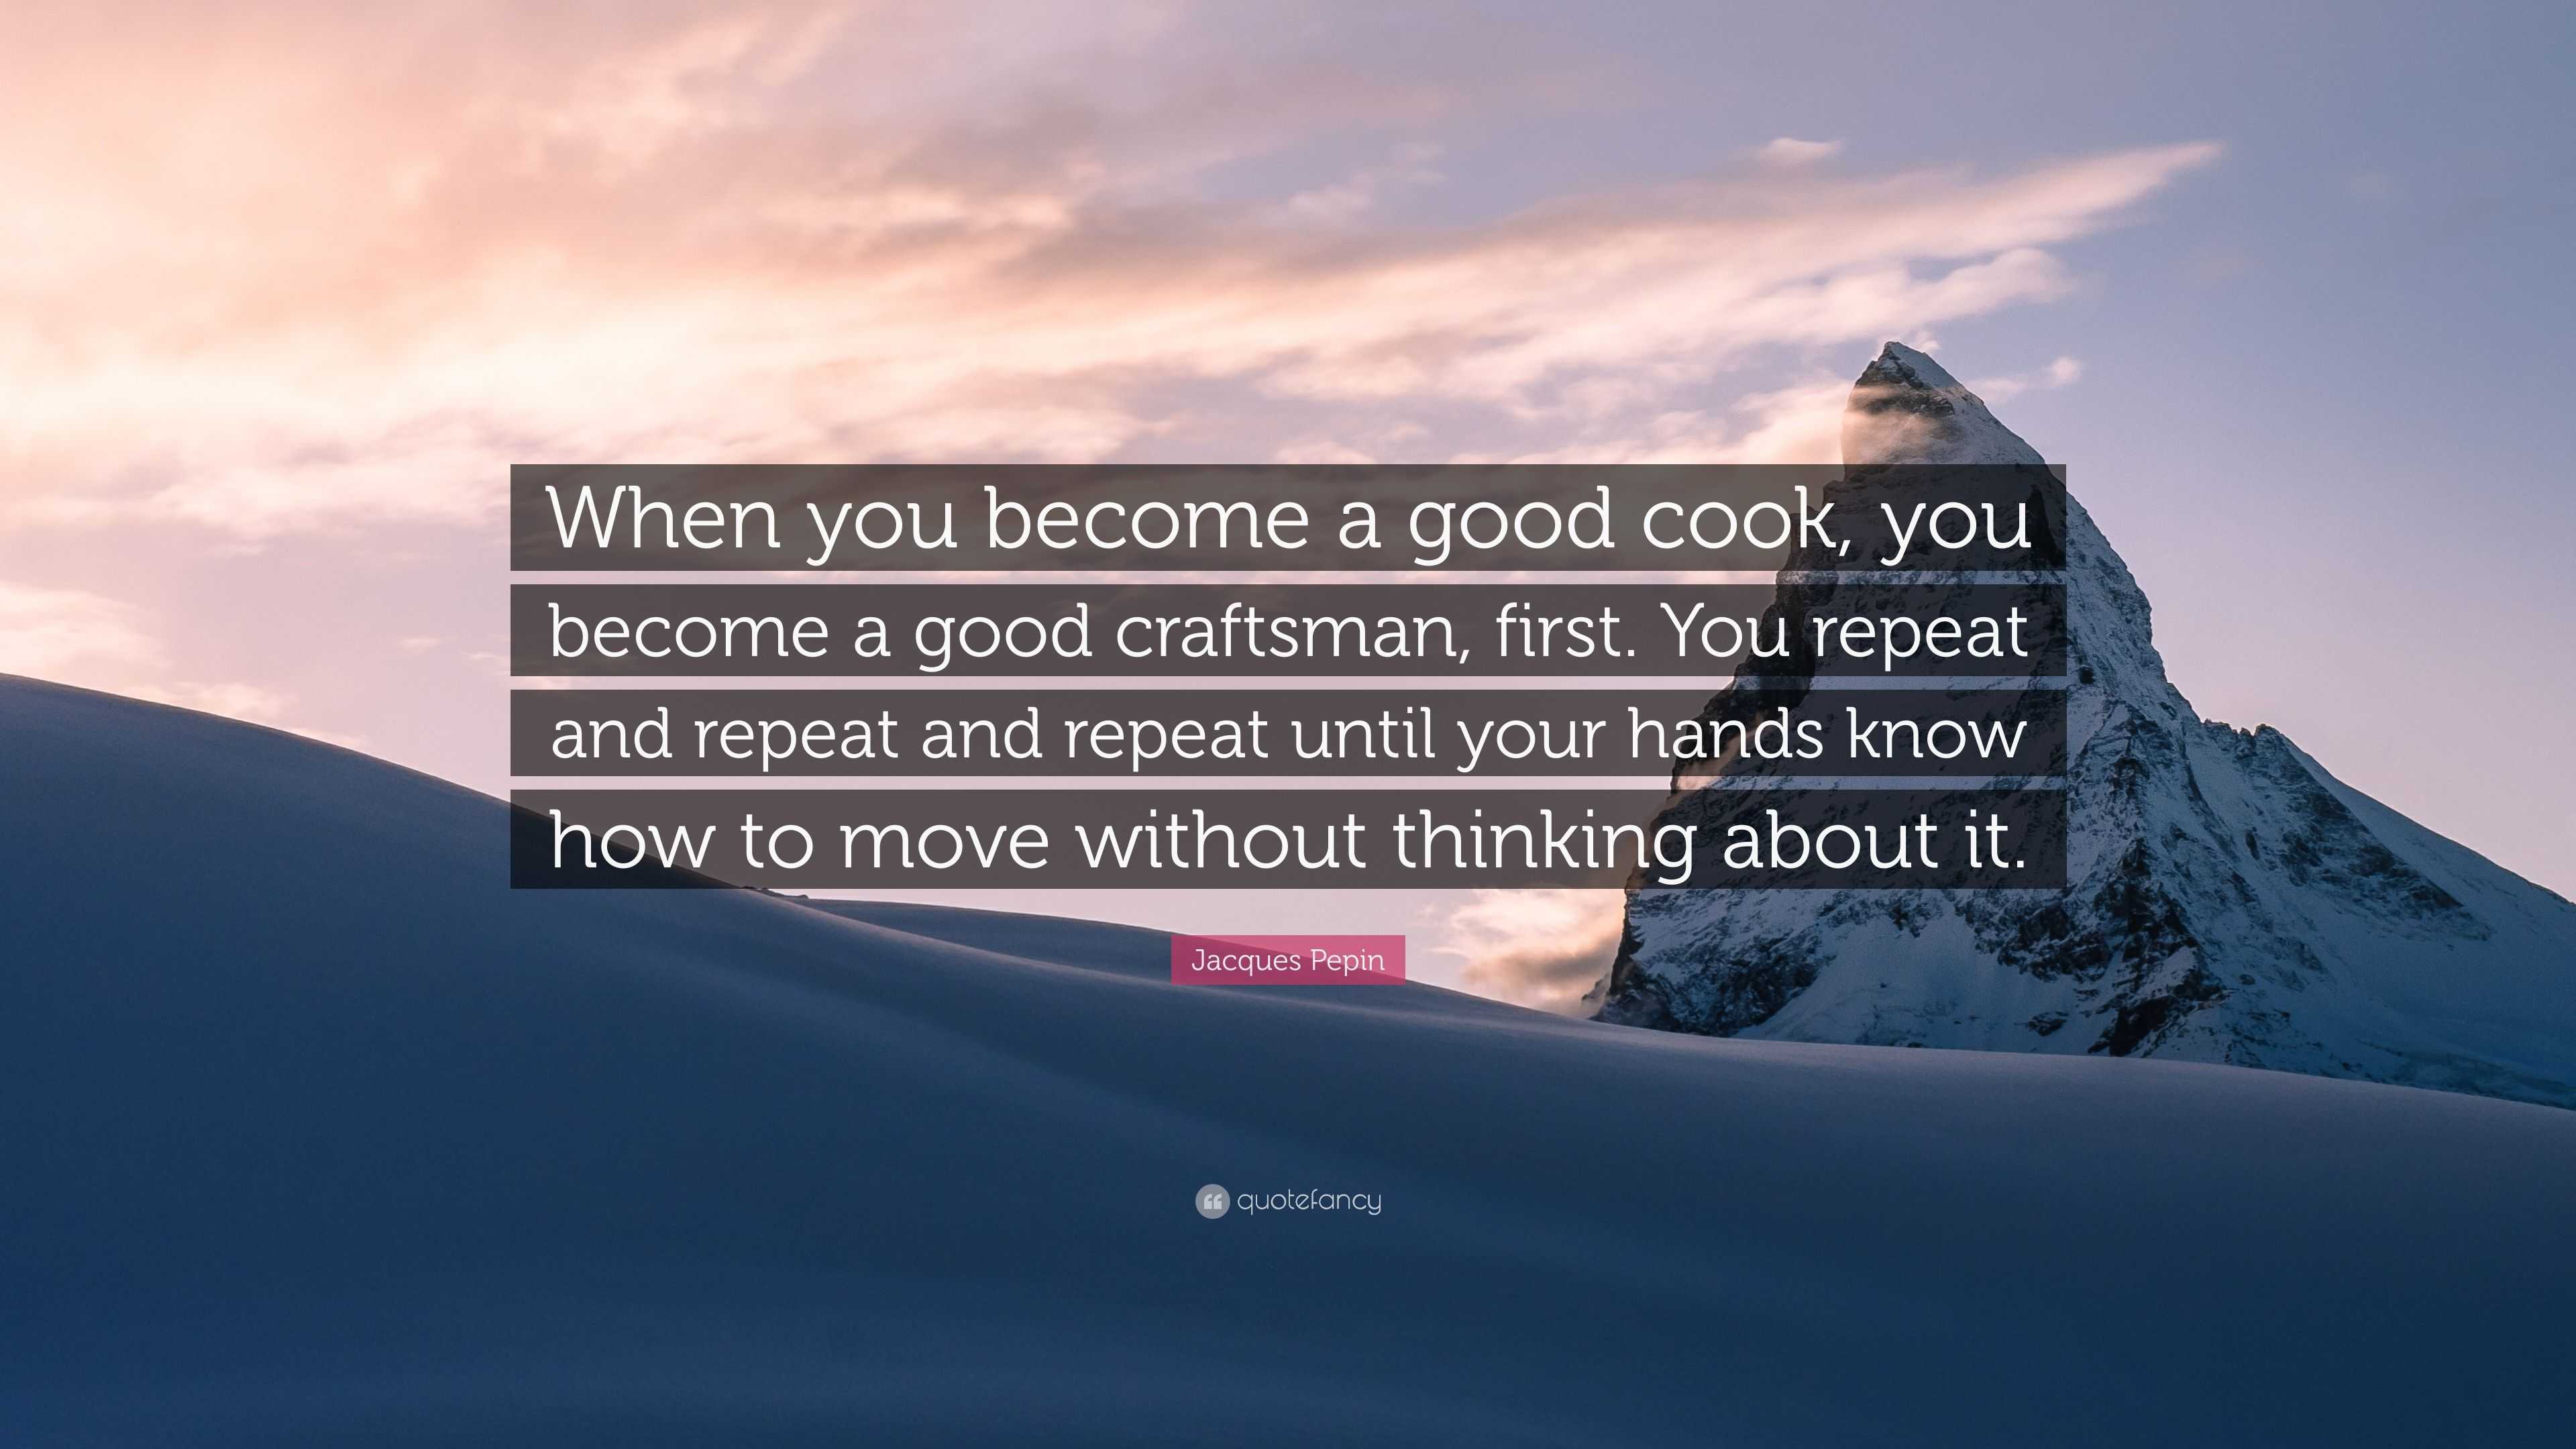 How to Become a Good Cook